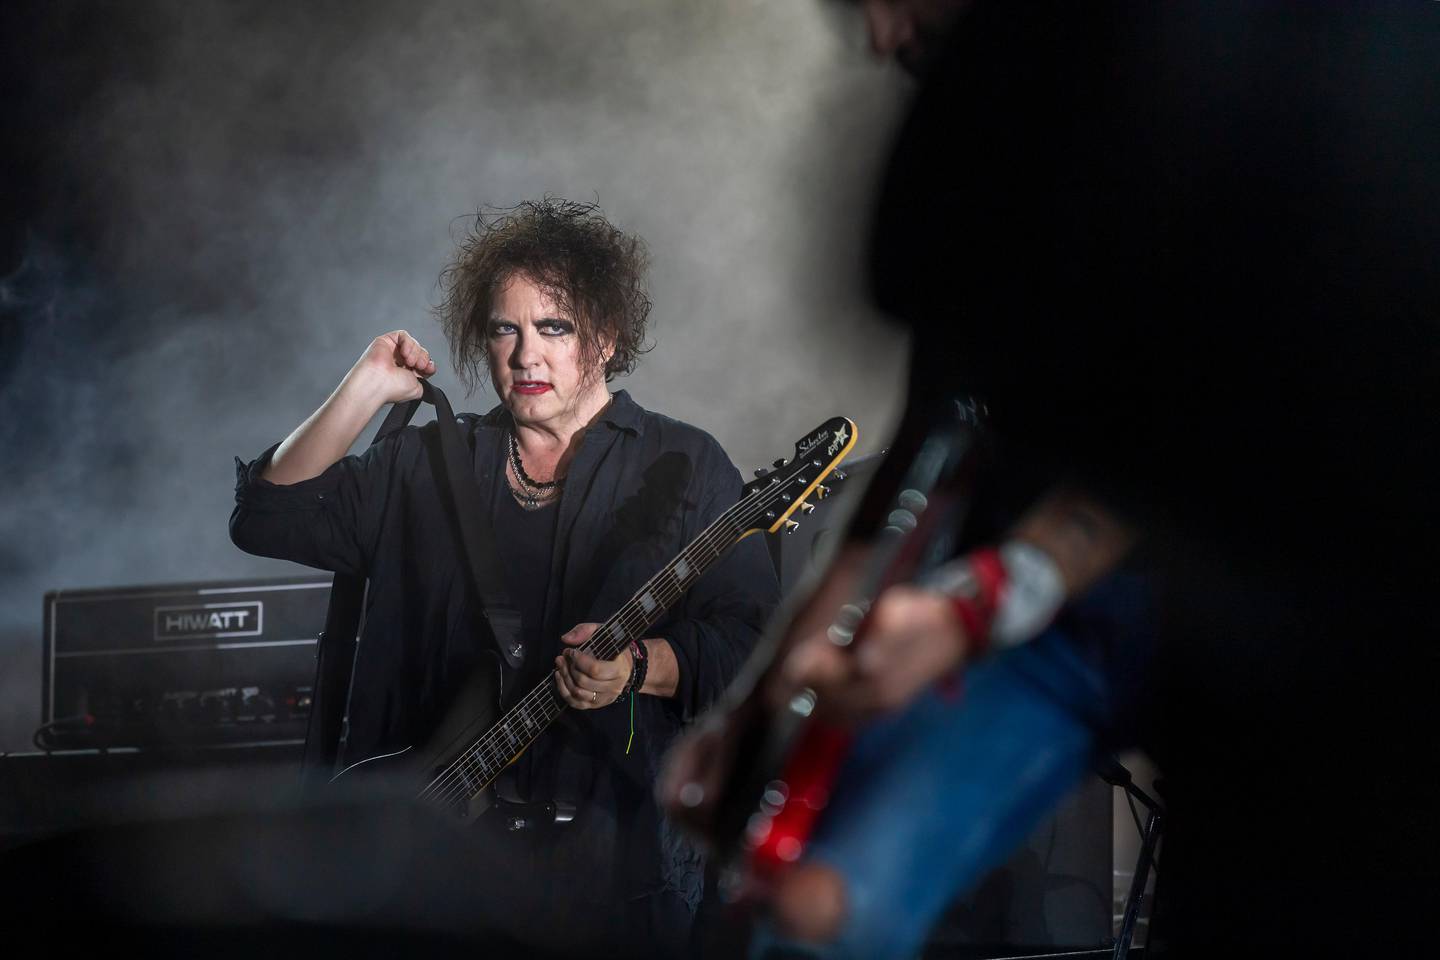 Singer of The Cure Robert Smith performs on the main stage, during the 44th edition of the Paleo Festival, in Nyon, Switzerland, Thursday, July 25, 2019. The Paleo is a open-air music festival in the western part of Switzerland that takes place from 23rd to 28th July. (Martial Trezzini/Keystone via AP)